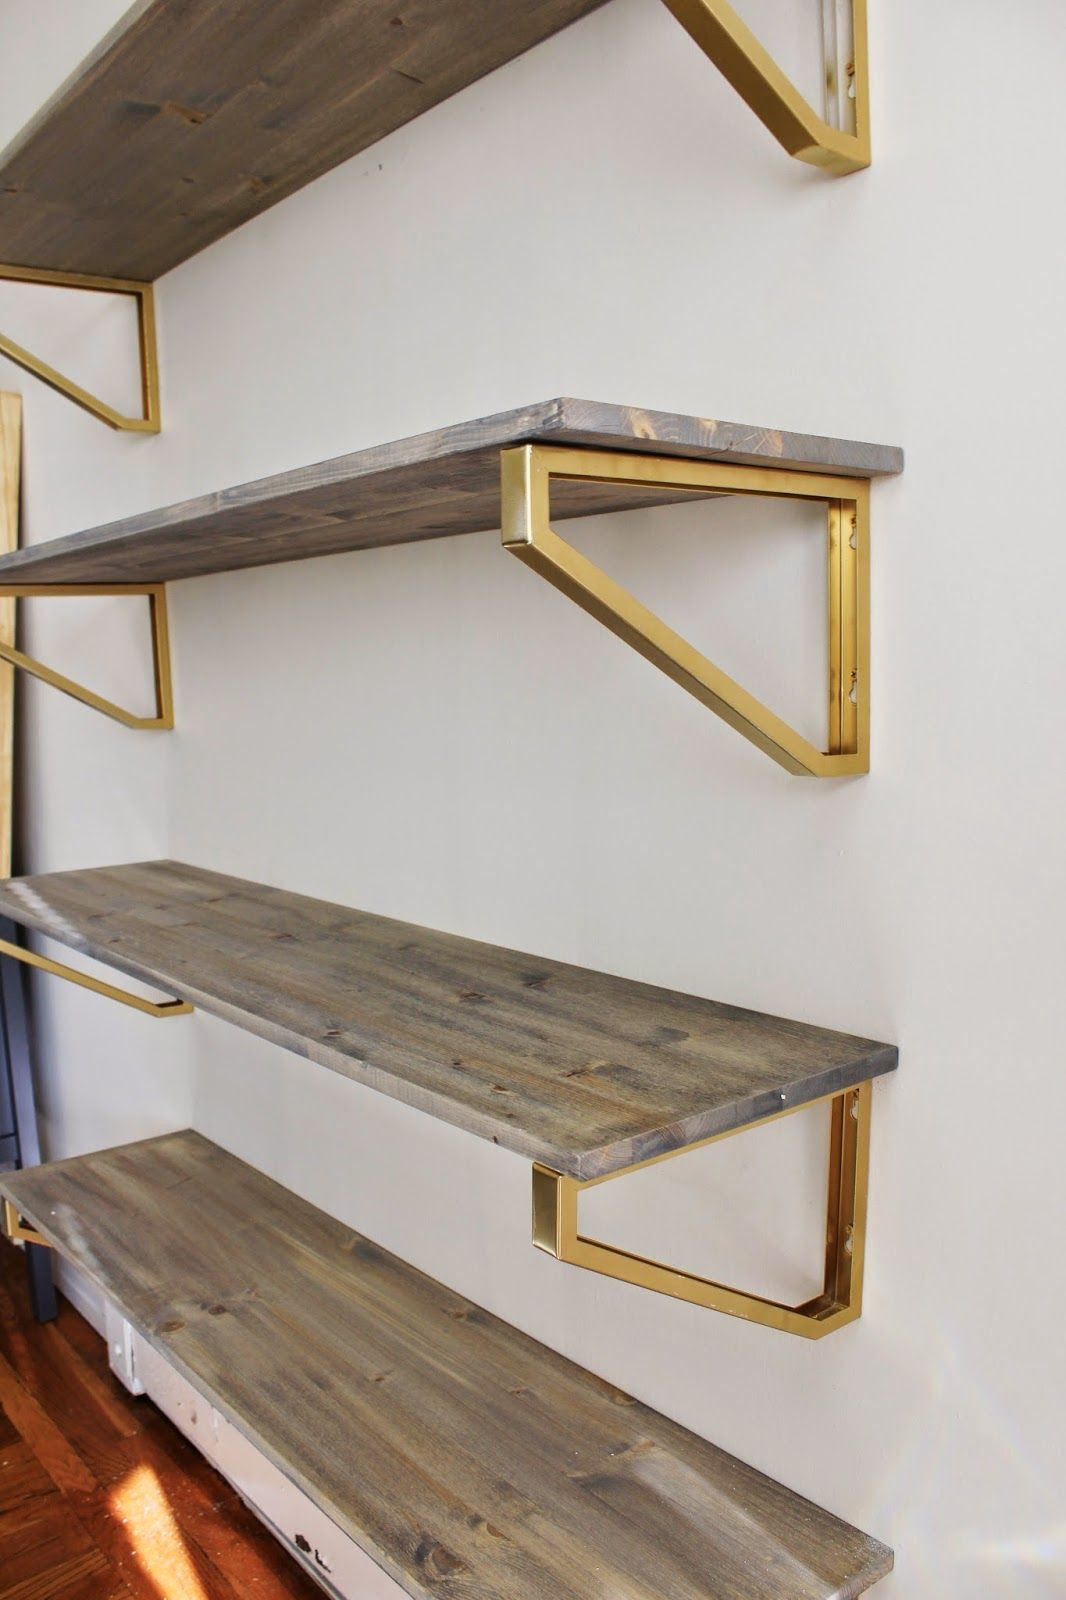 DIY Shelving Brackets
 Diverse DIY Suspended Shelves That Add Flavor To Your Décor